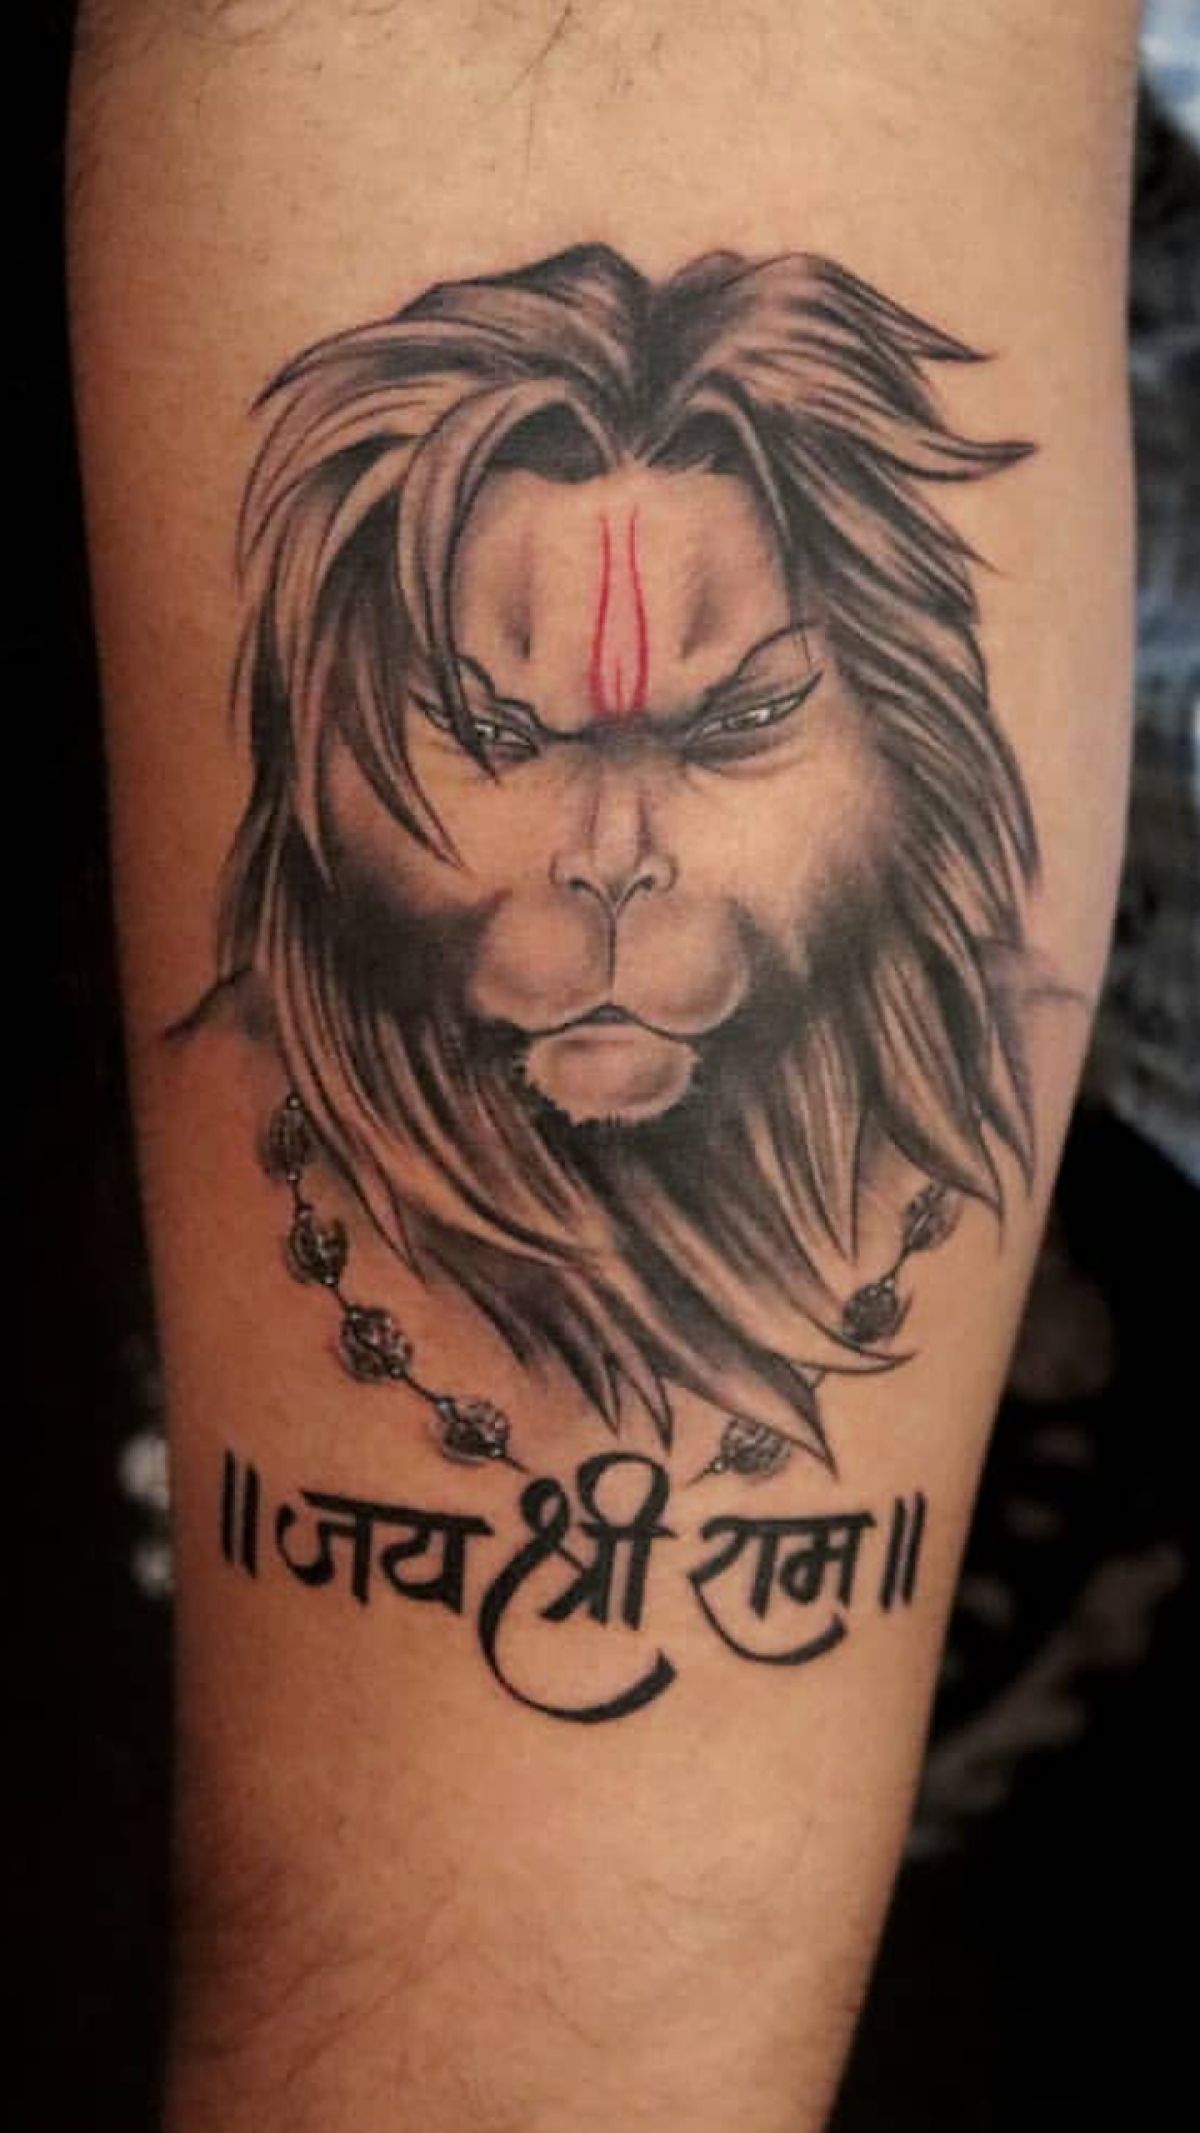 Most Powerful and Divine Lord Hanuman Tattoo Design Ideas  Hanuman tattoo  Tattoos Arm tattoos for guys